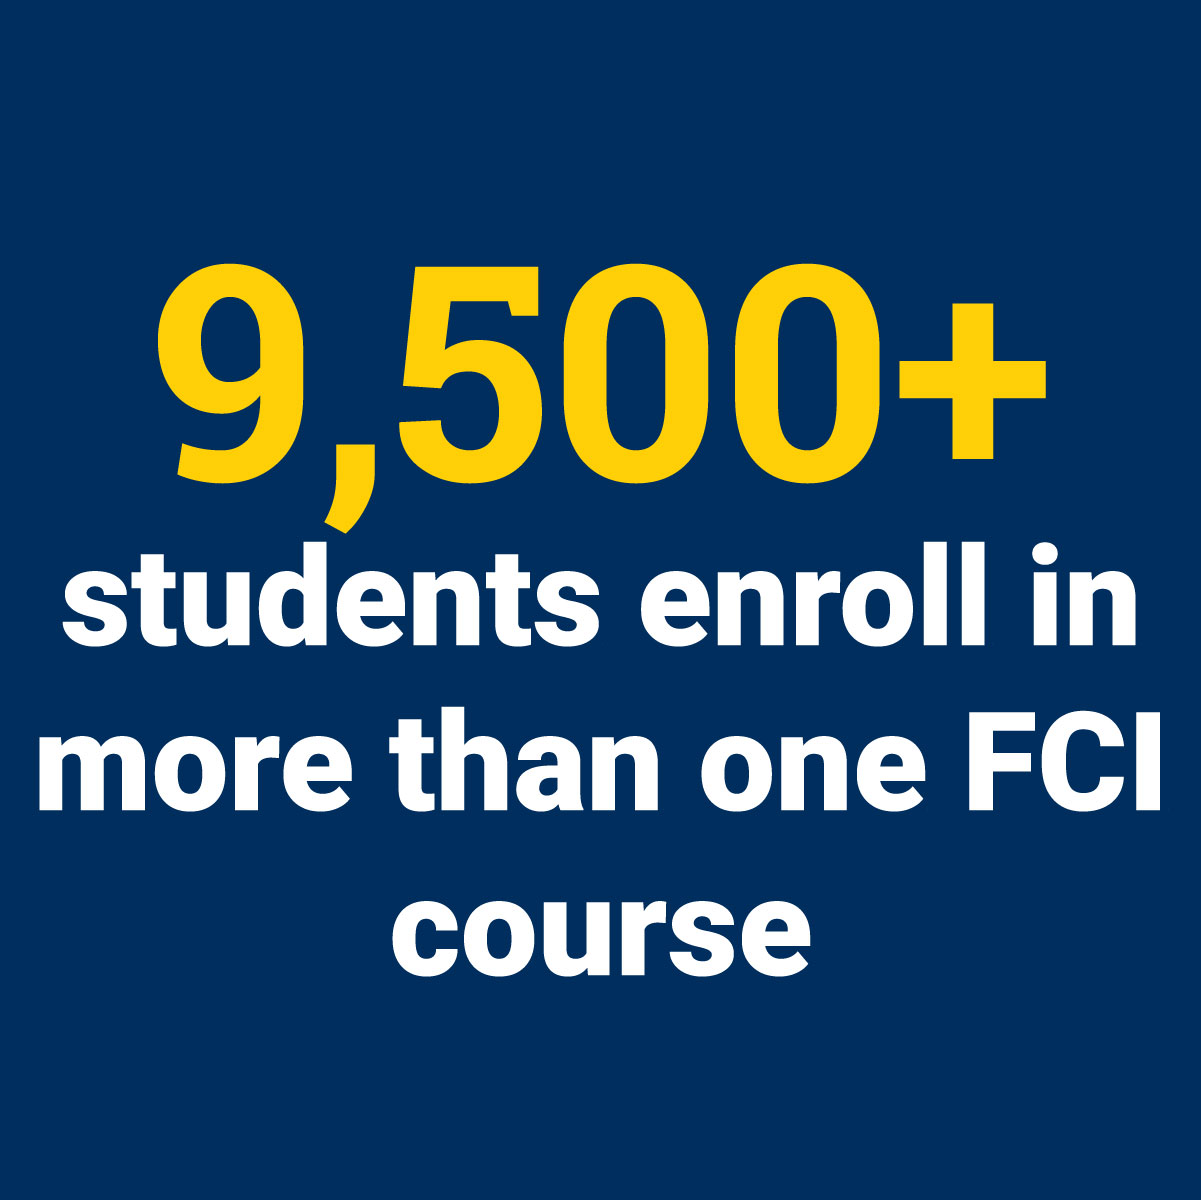 9,500+ students enroll in more than one FCI course